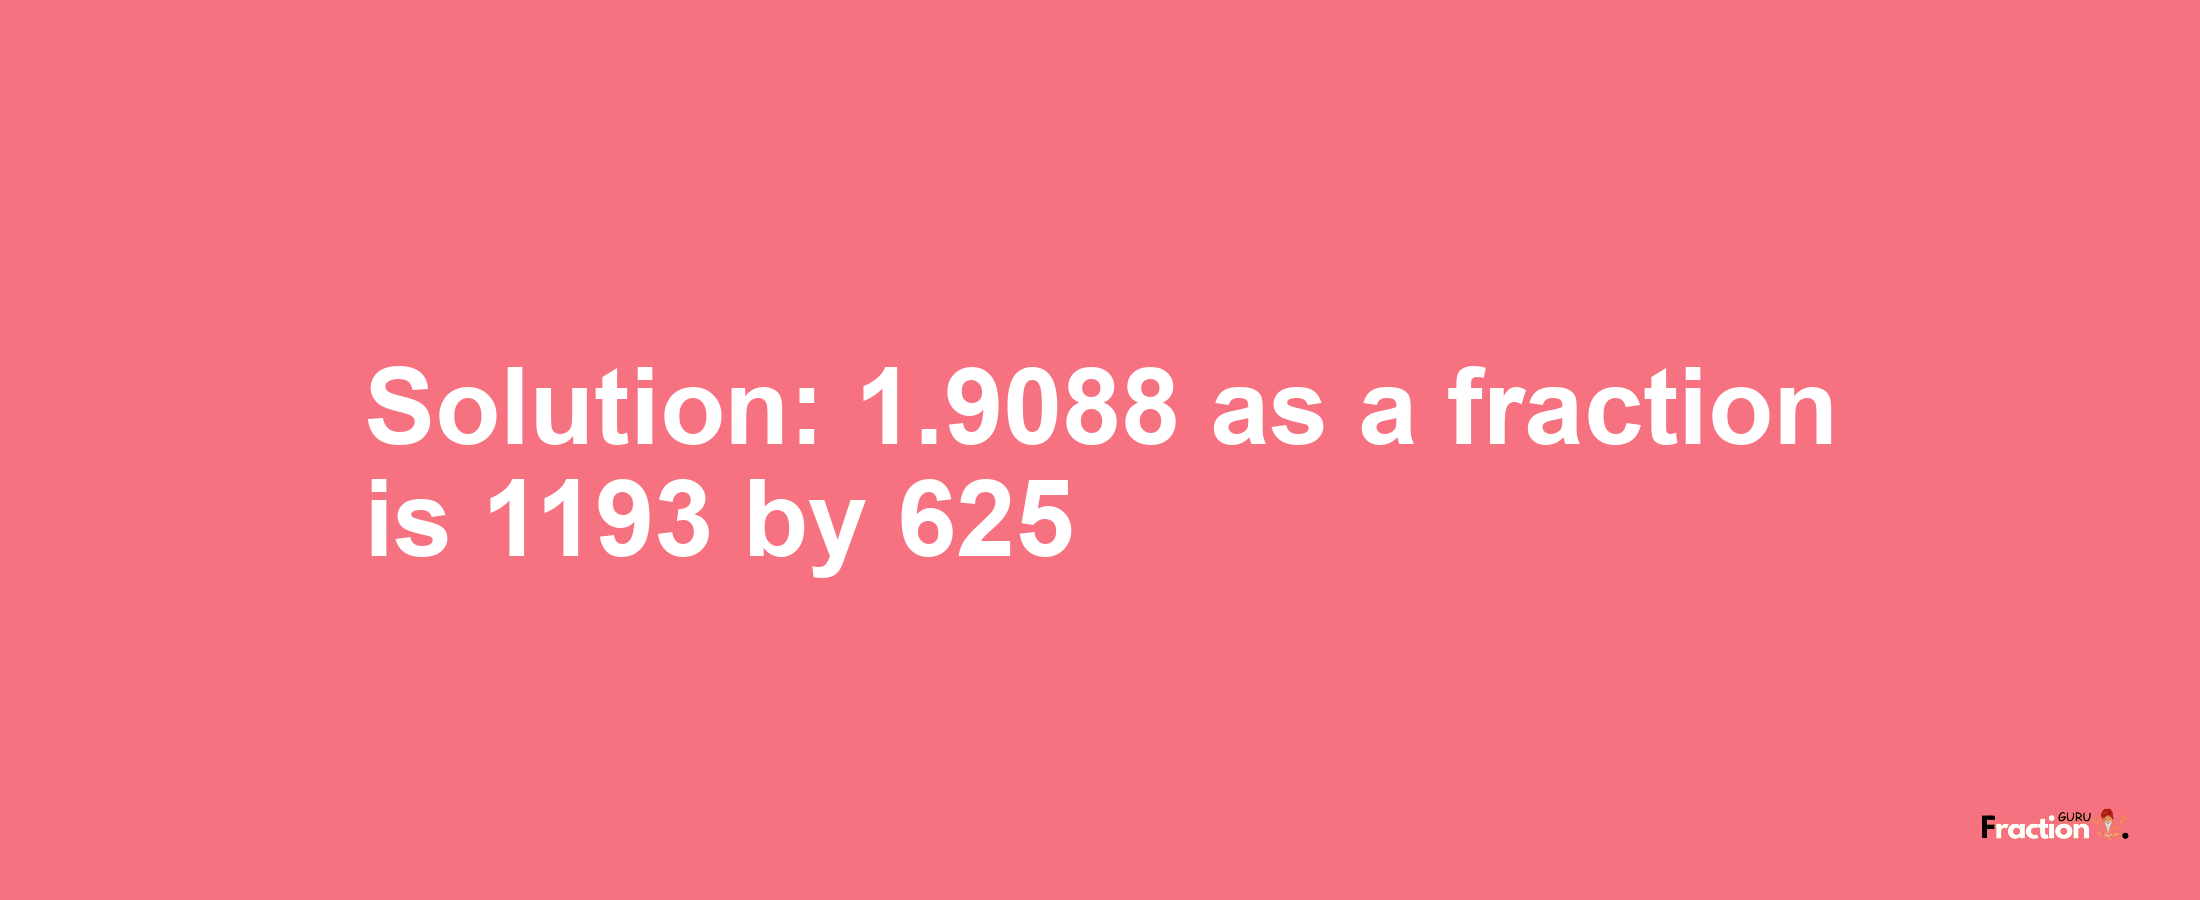 Solution:1.9088 as a fraction is 1193/625